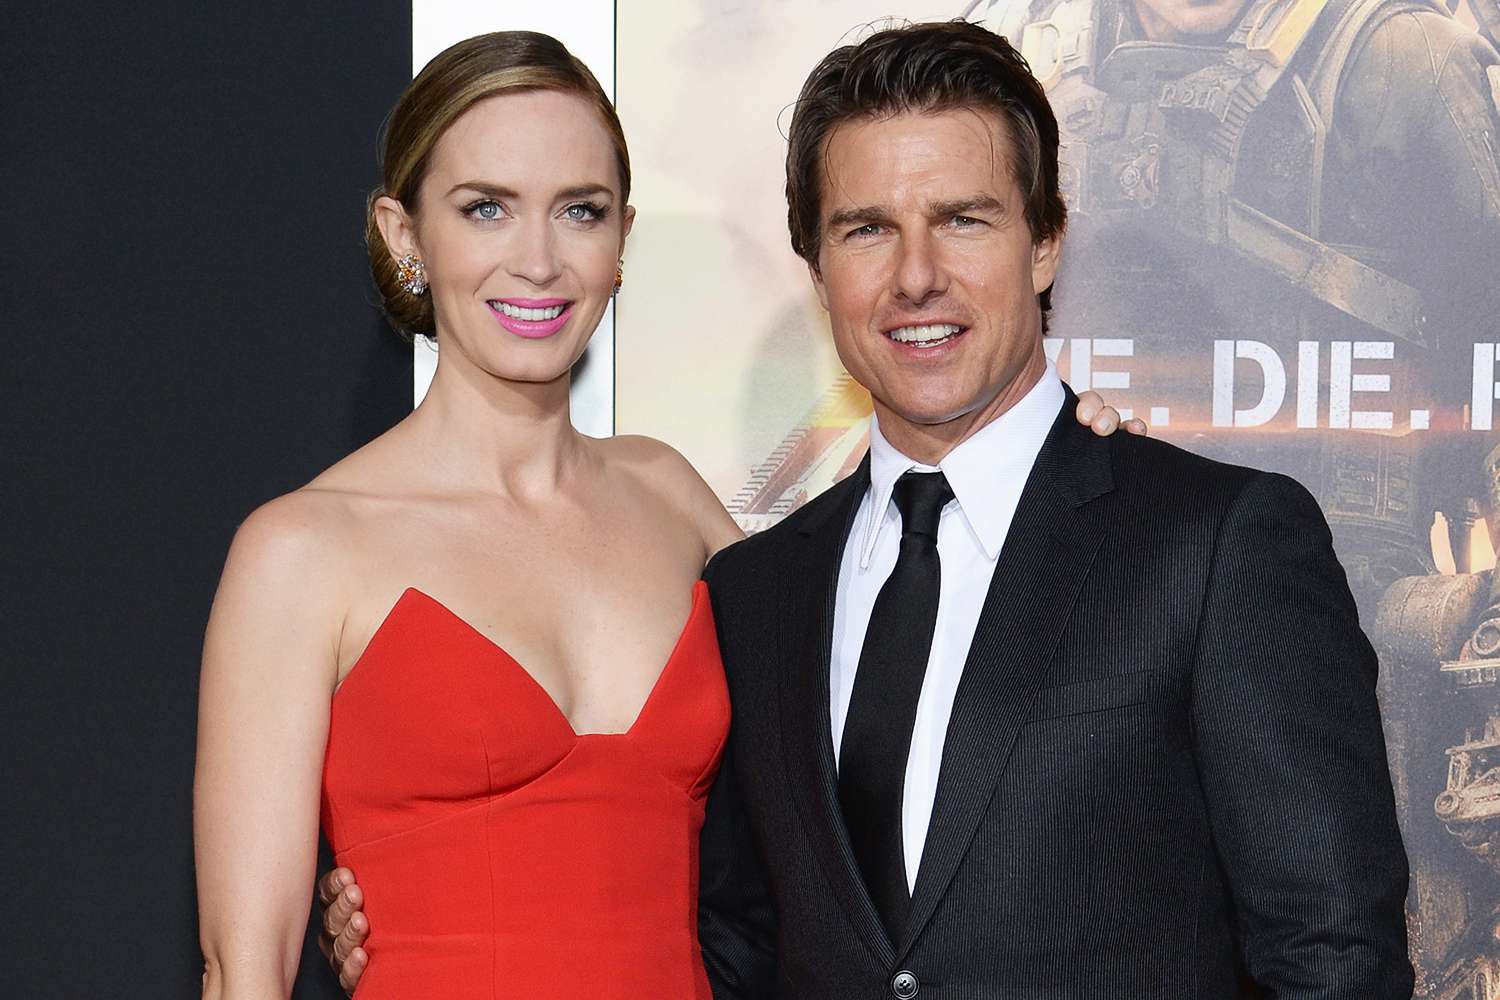 Tom Cruise Marks 10 Years Since “Edge of Tomorrow” with 'Great Friend' Emily Blunt: 'Incredible Memories'